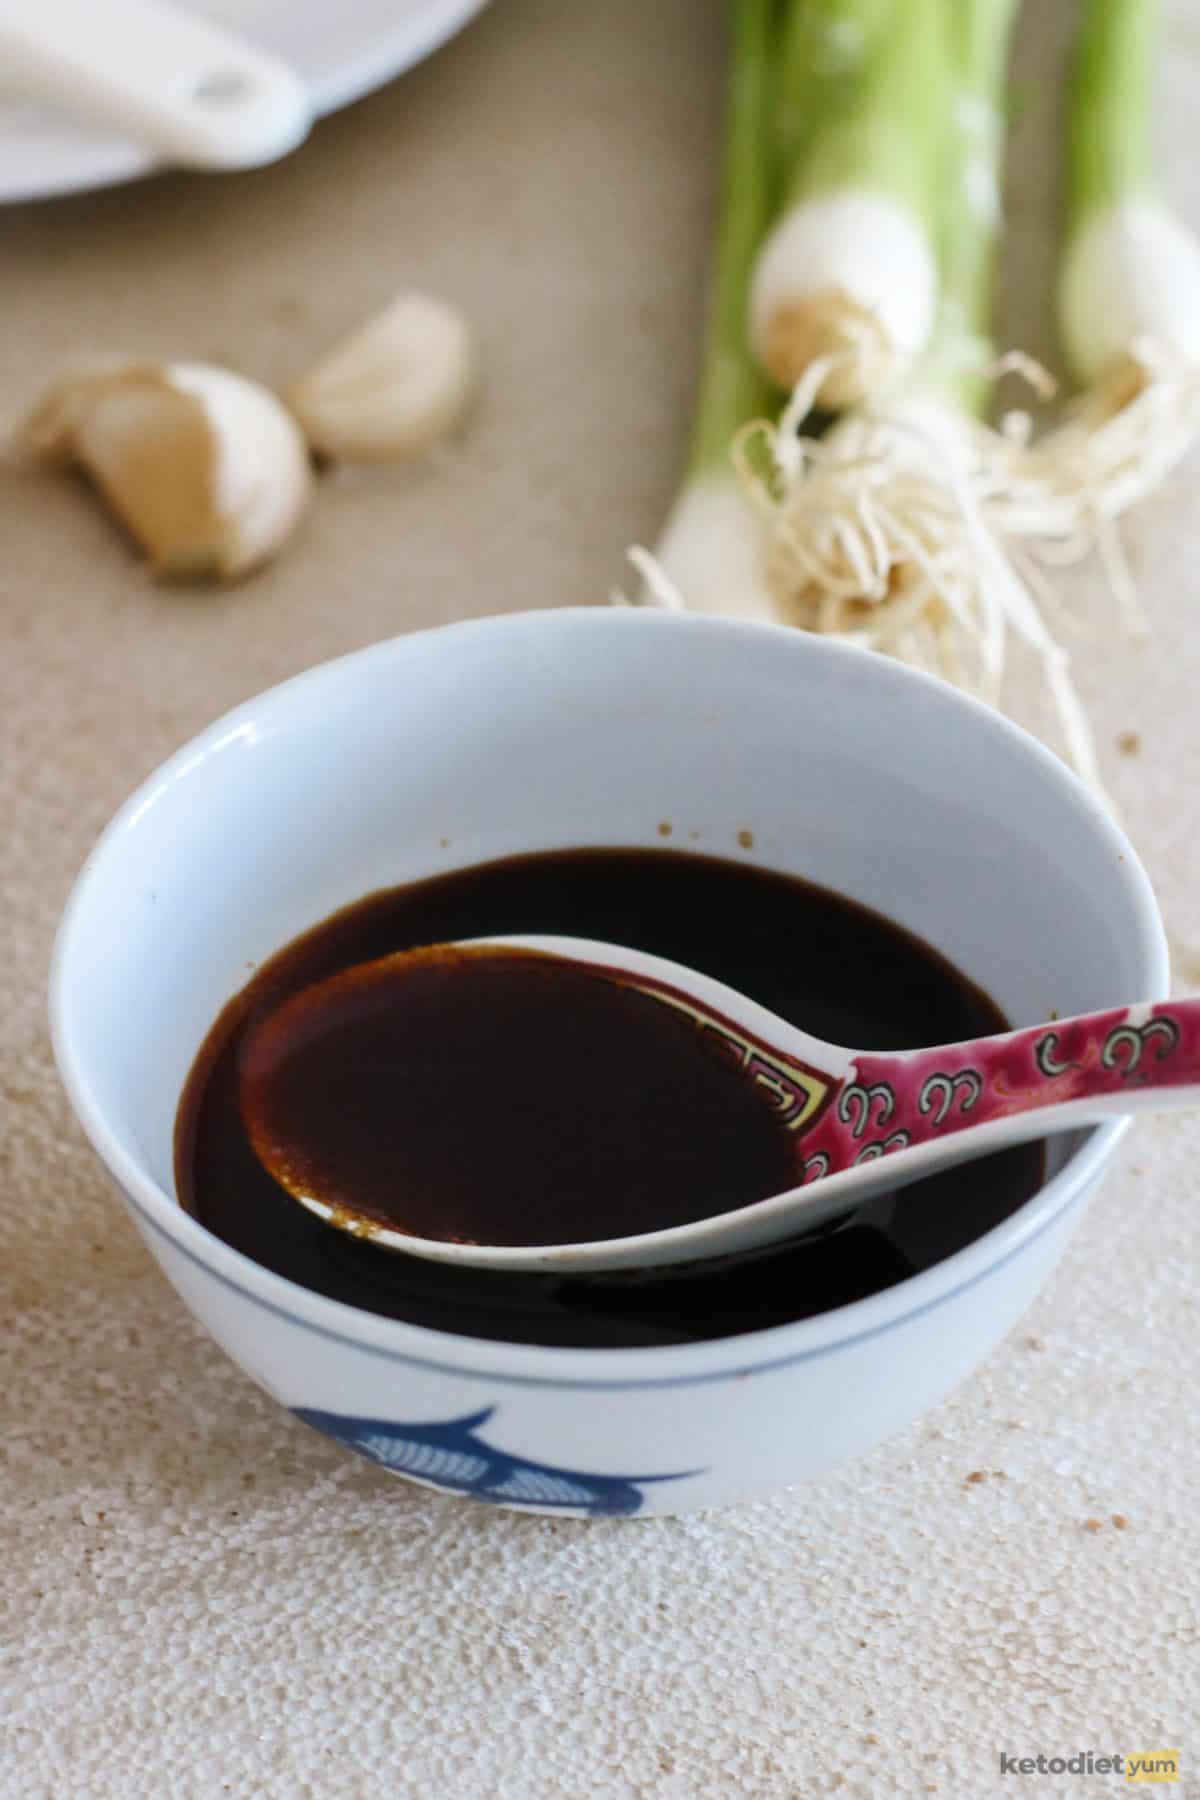 Erythritol and soy sauce combined in a mixing bowl